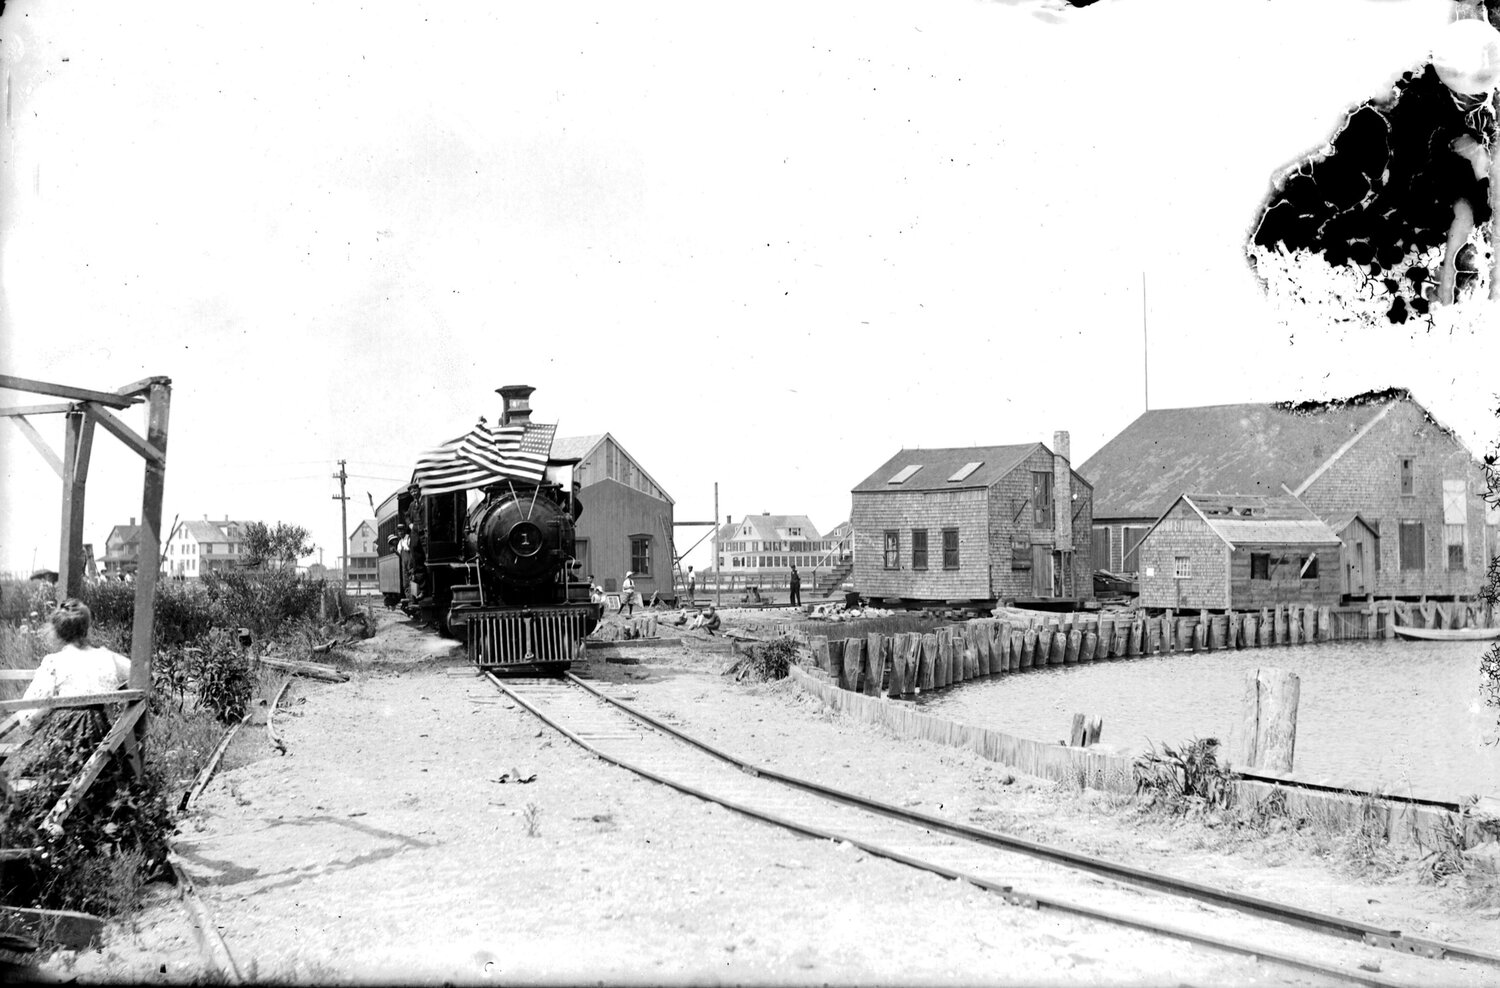 Bedecked with flags for Independence Day, Nantucket Central Railroad Engine No. 1 leaves Steamboat Wharf in July 1901.